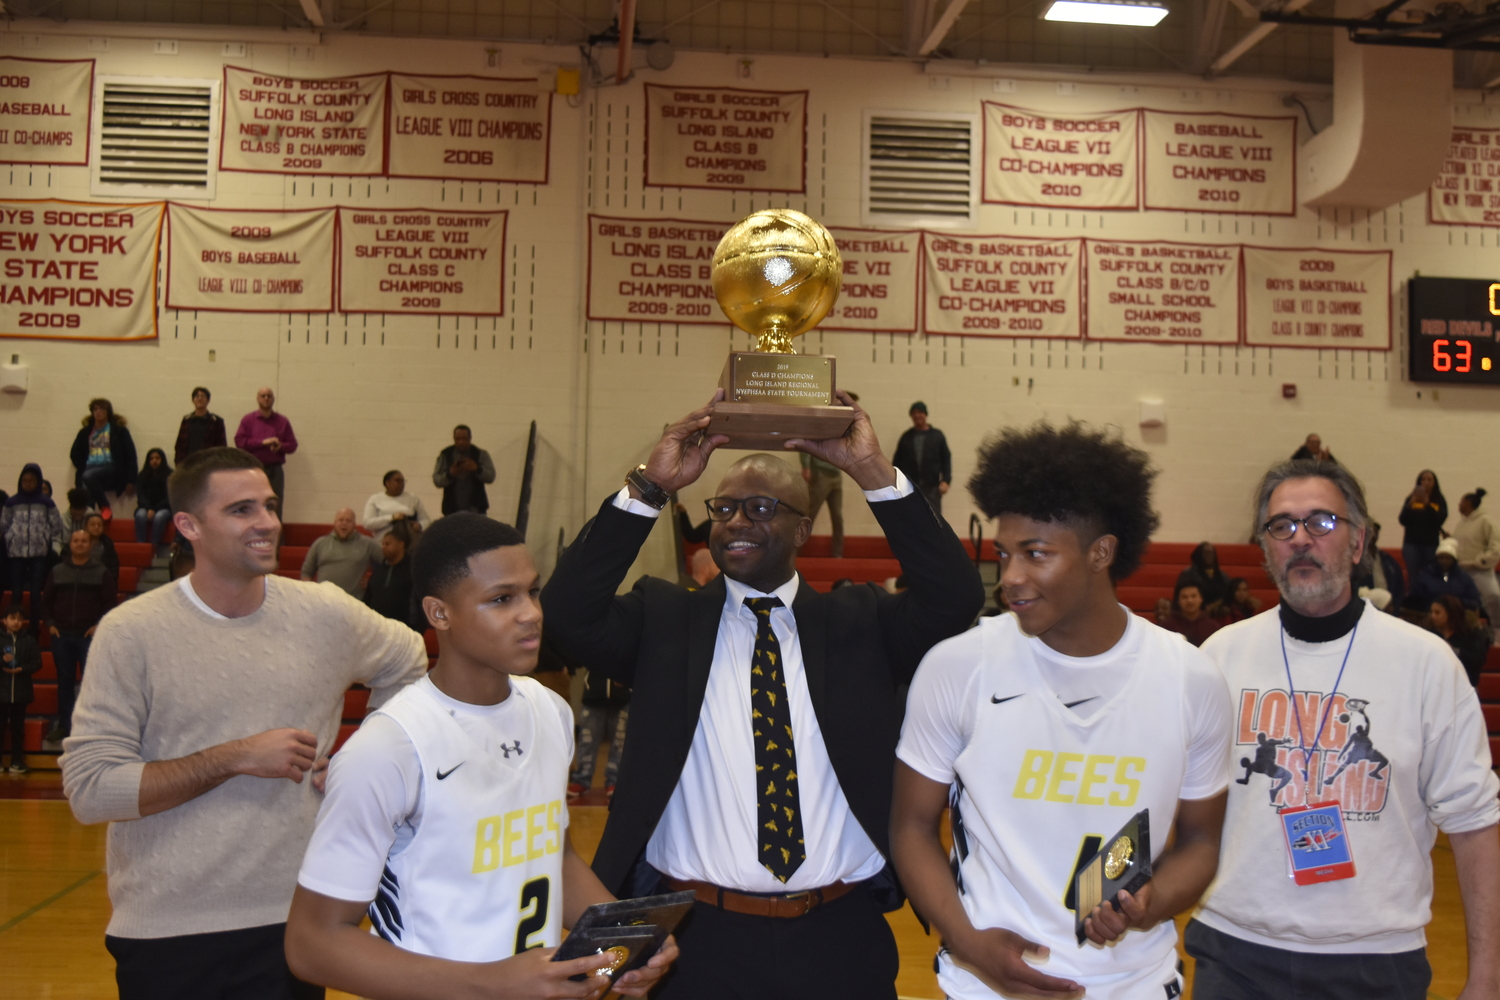 Ron White hoists what is the only Long Island Championship in Bridgehampton boys basketball history in 2019.    DREW BUDD